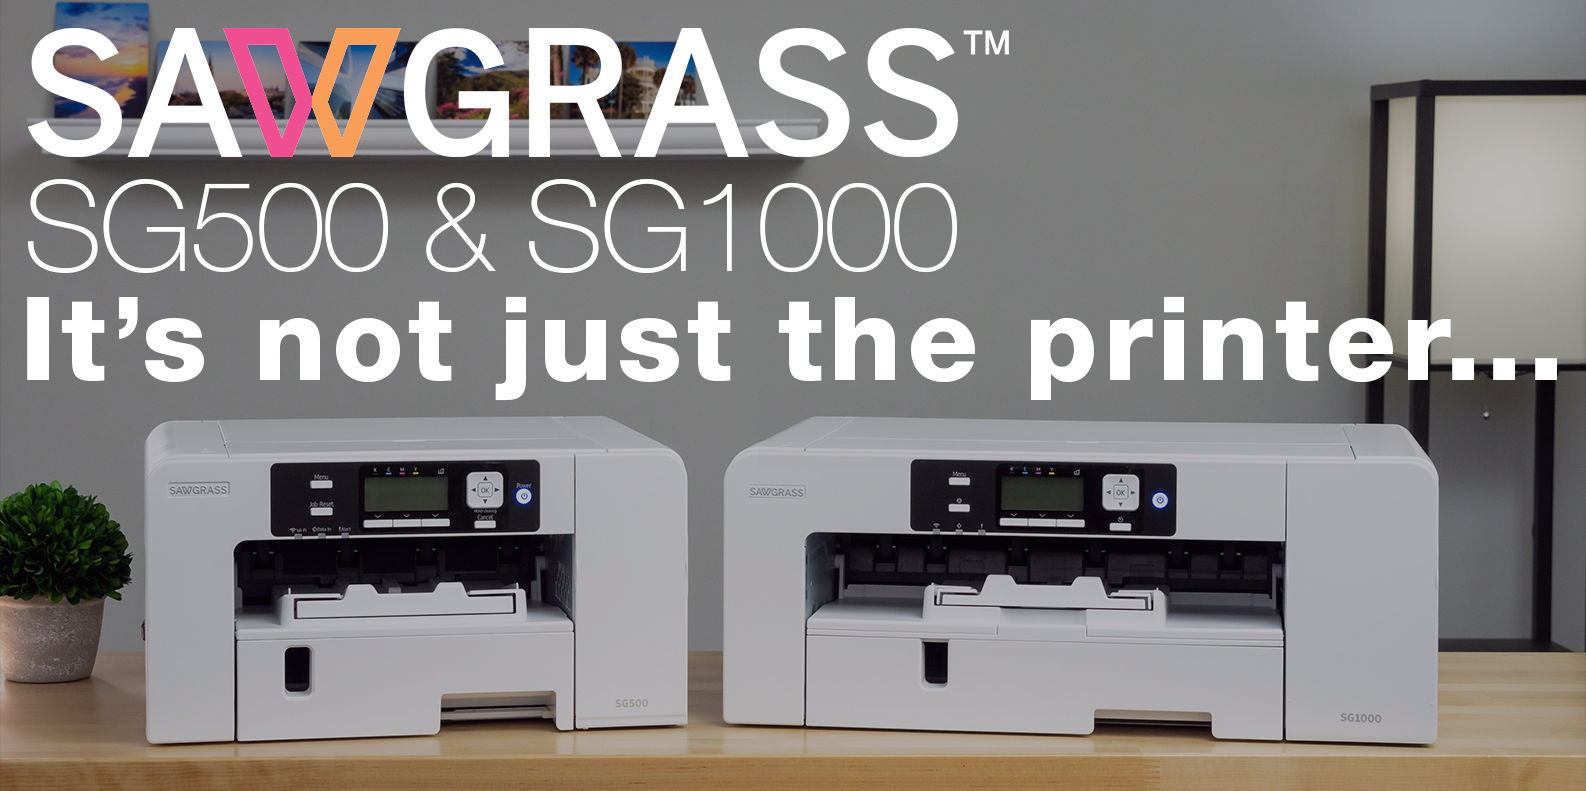 Sawgrass SG500 & SG1000, It's not just the printer.